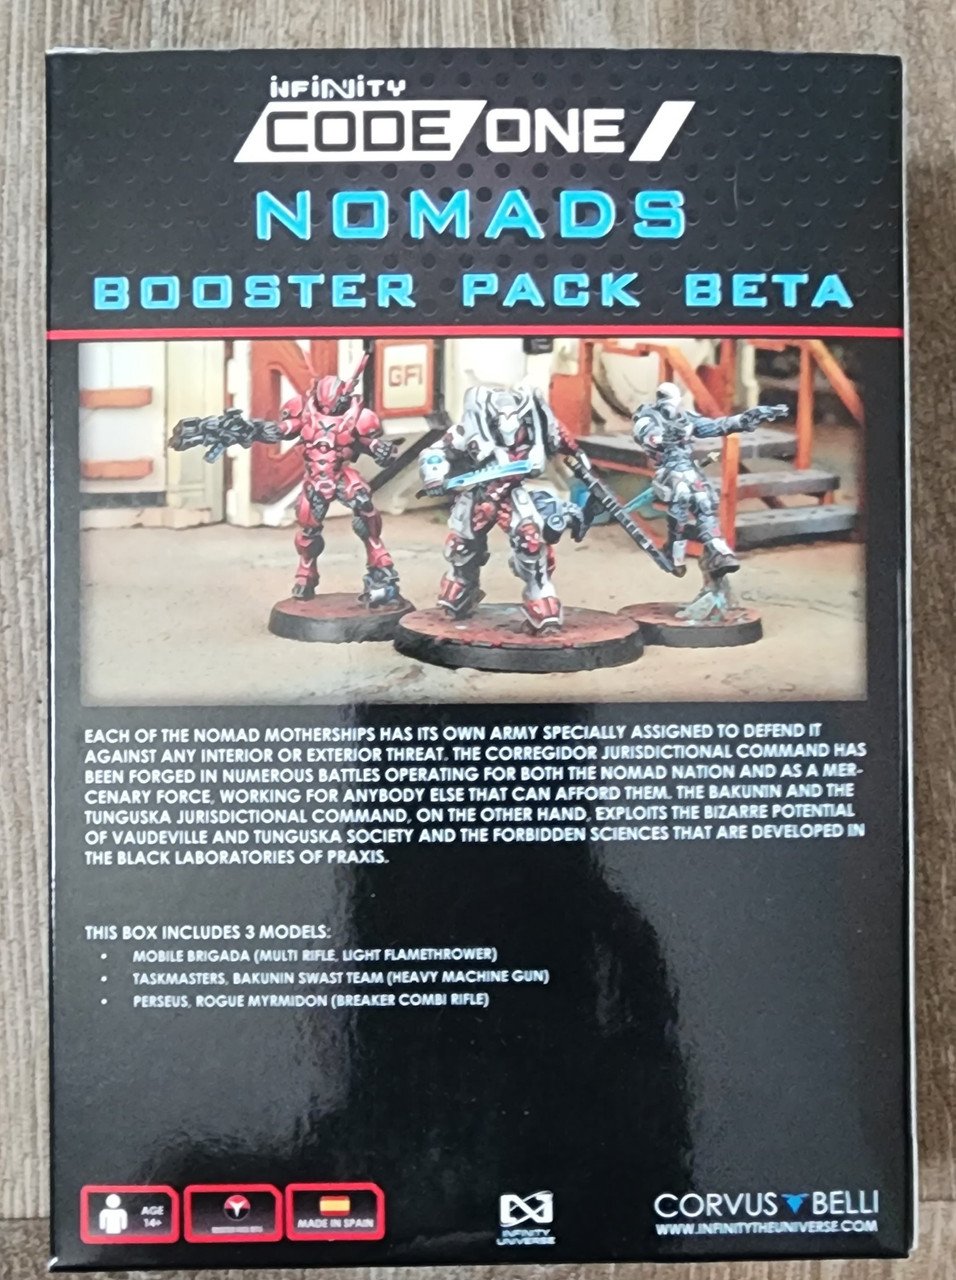 Infinity Codeone Nomads Booster Pack Beta (*See Per Order Flat Rate Shipping)